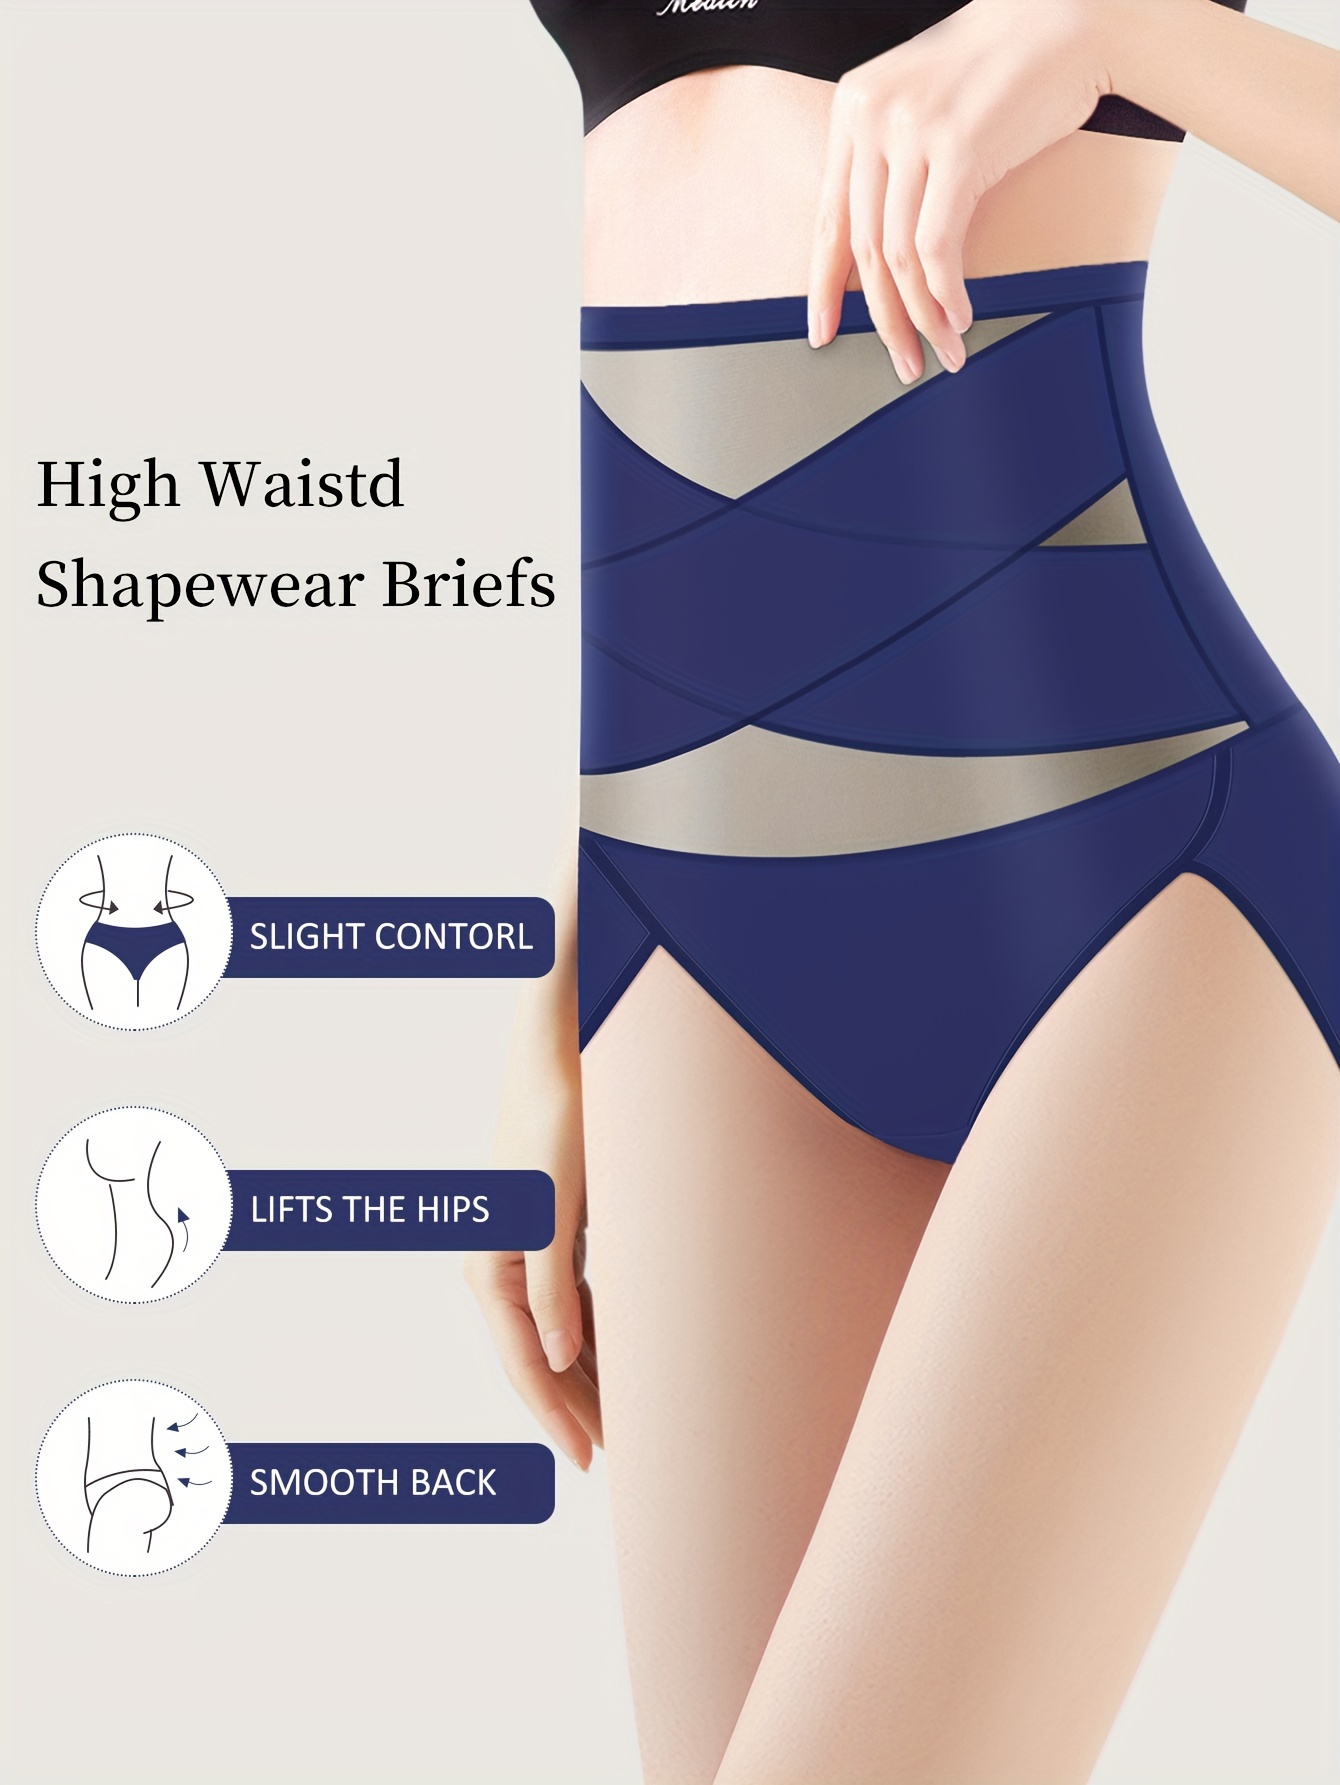 Women High Waisted Cross Compression Abs Shaping Pants Slimming Body Shaper